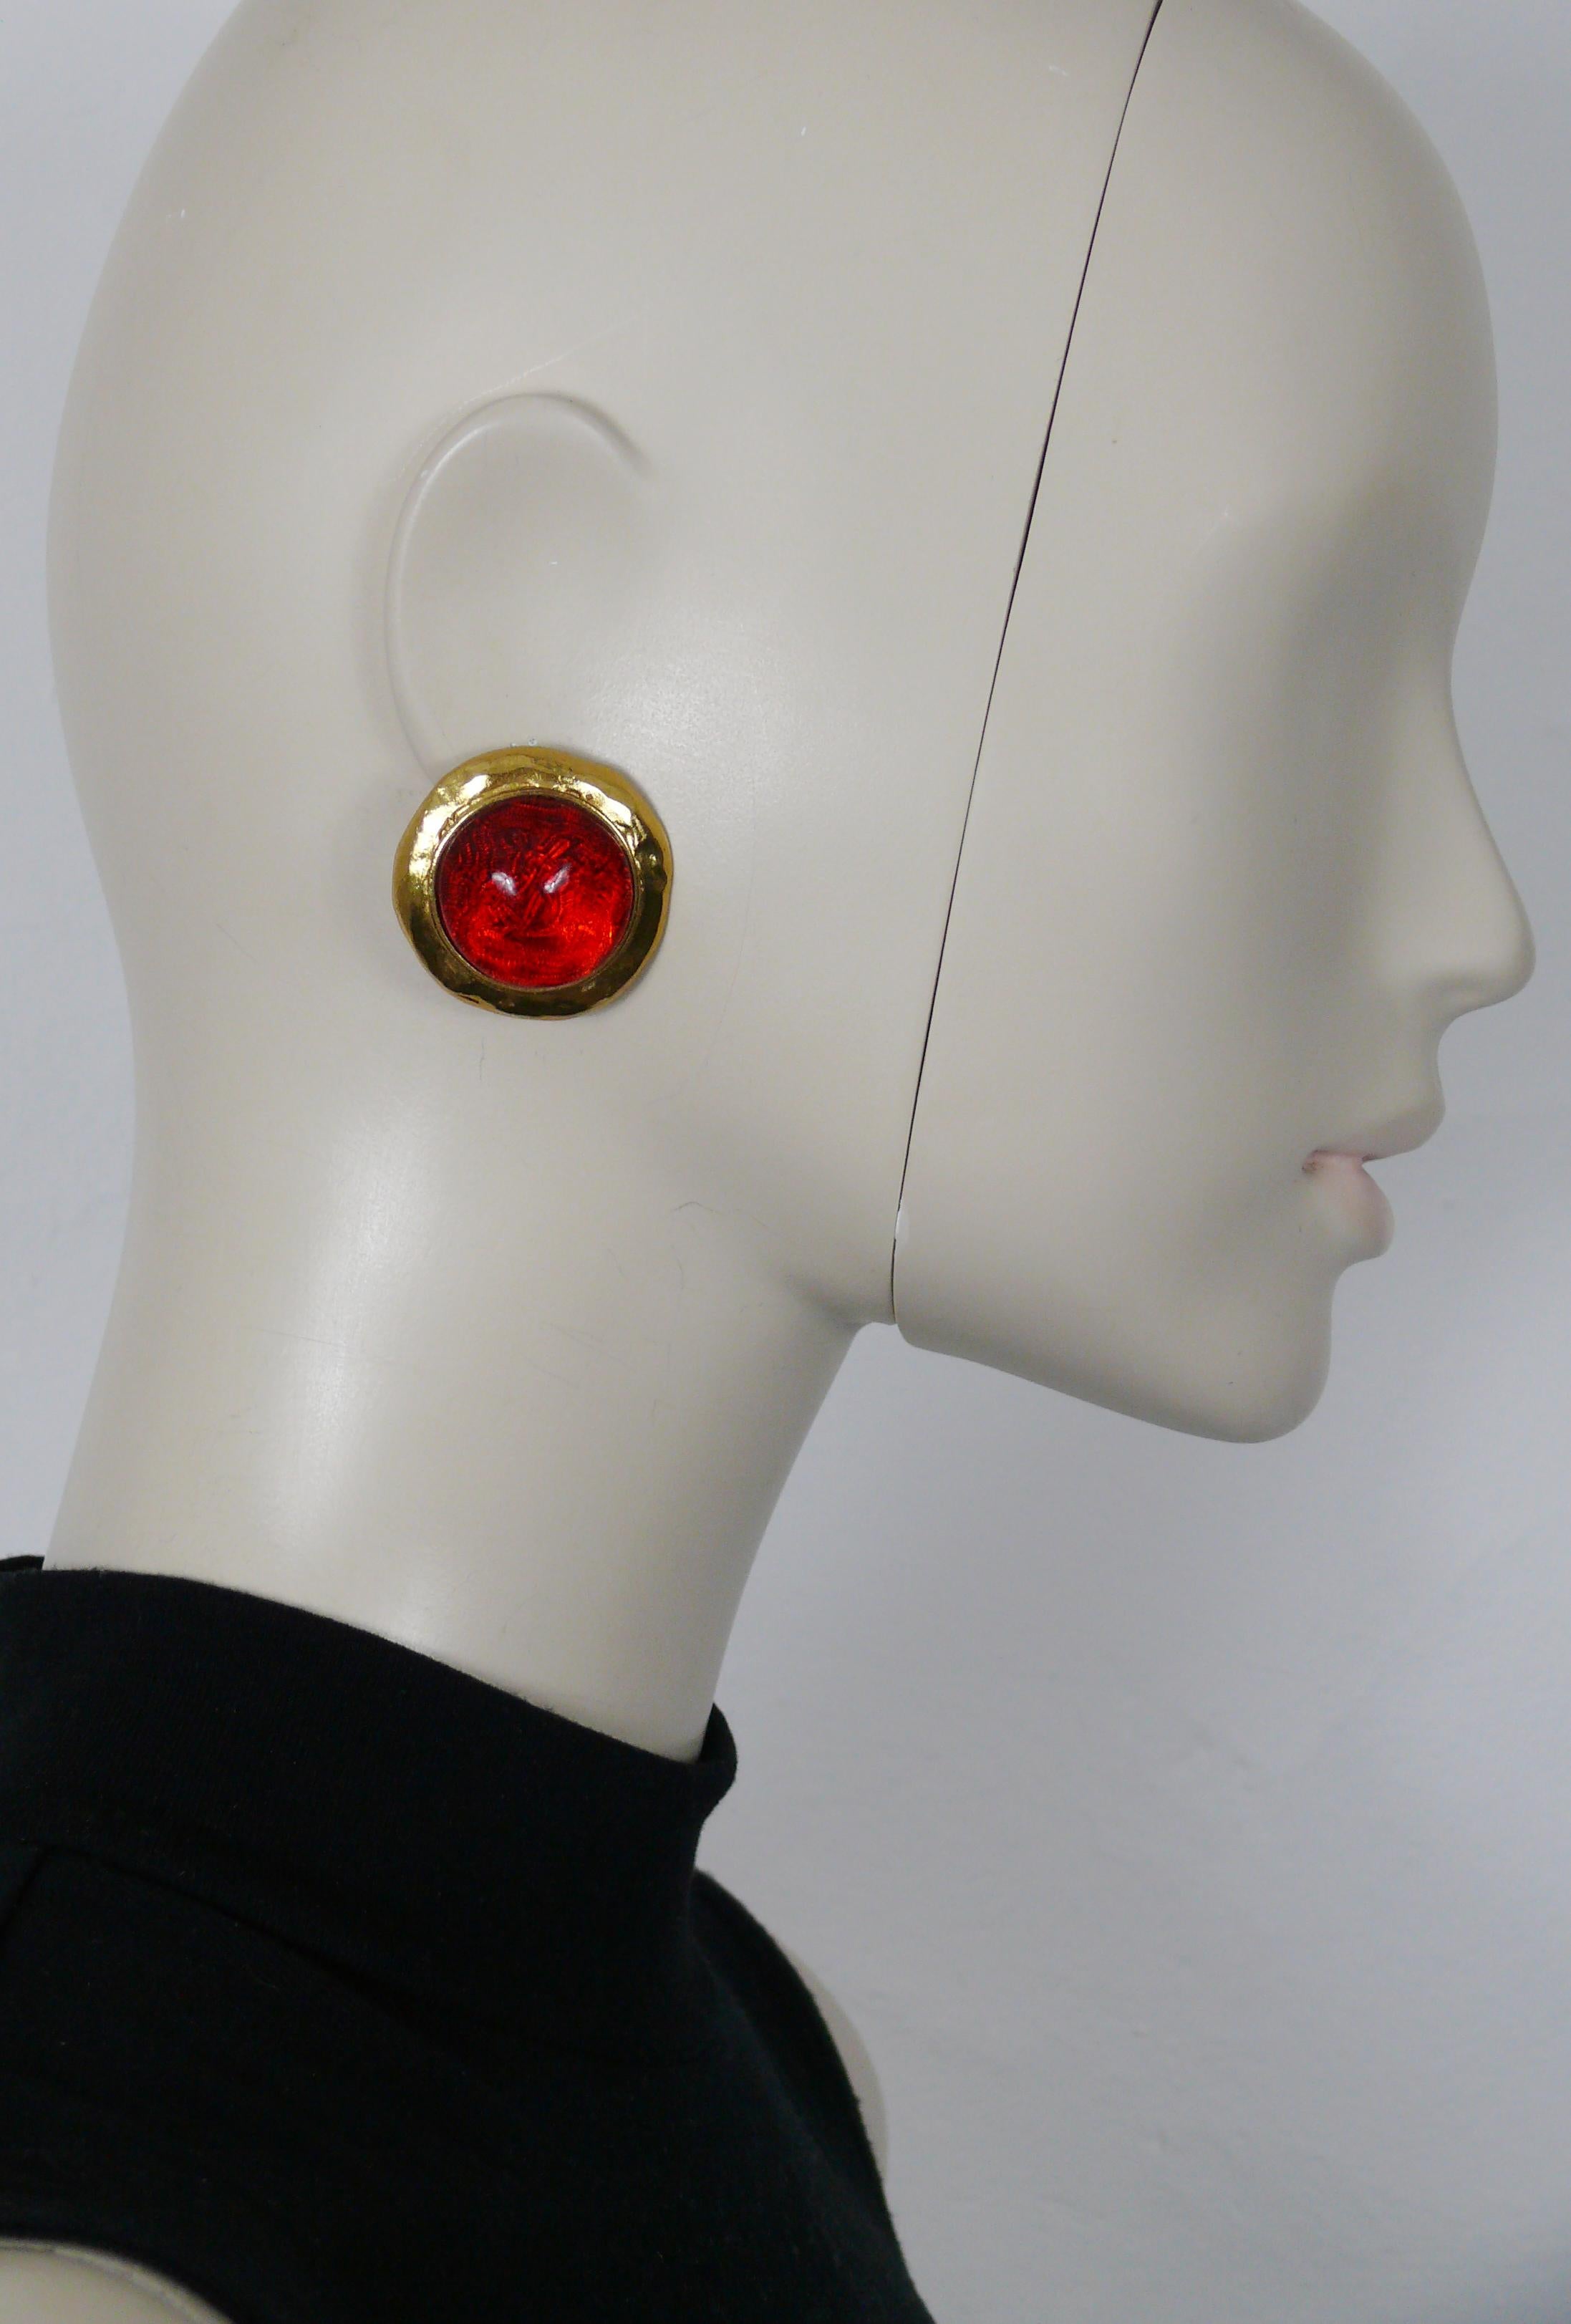 YVES SAINT LAURENT vintage textured gold toned clip-on earrings featuring a red domed resin cabochon with YSL logo inlaid.

Embossed YSL Made in France.

Indicative measurements : approx. 3.3 cm x 3.3 cm (1.30 inches x 1.30 inches).

Weight per